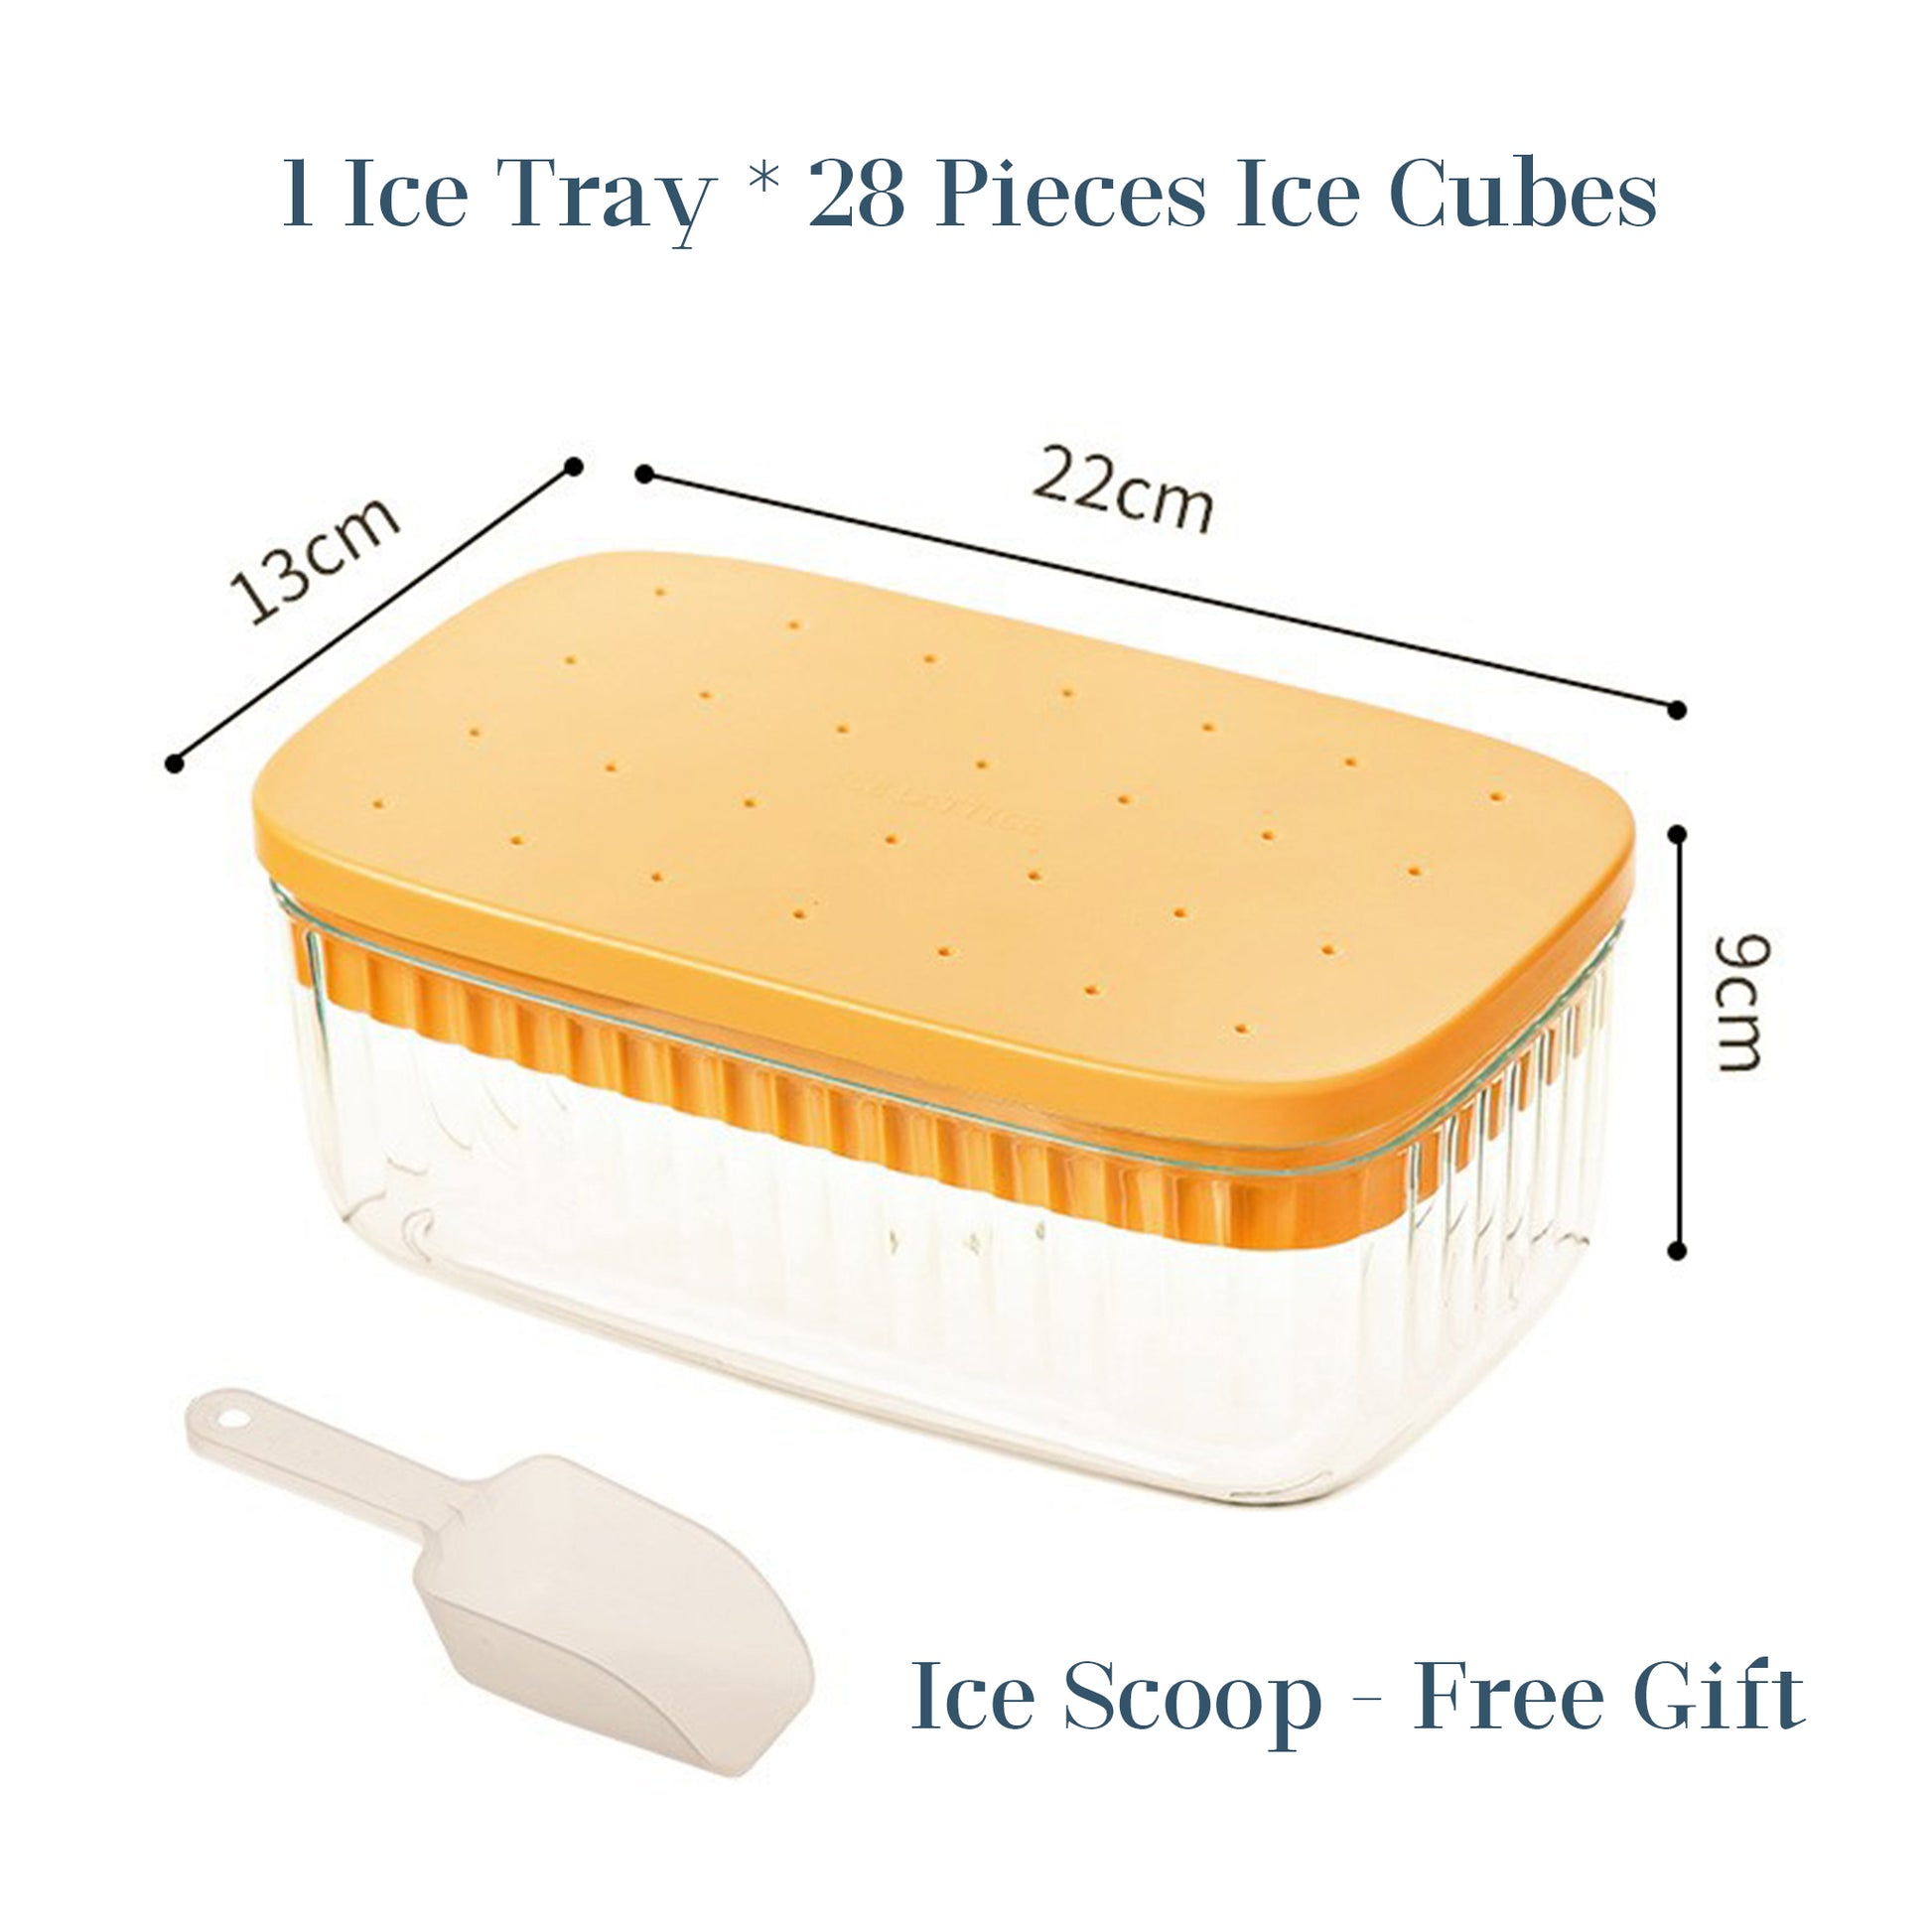 Press & release Ice Tray – Angles Stores